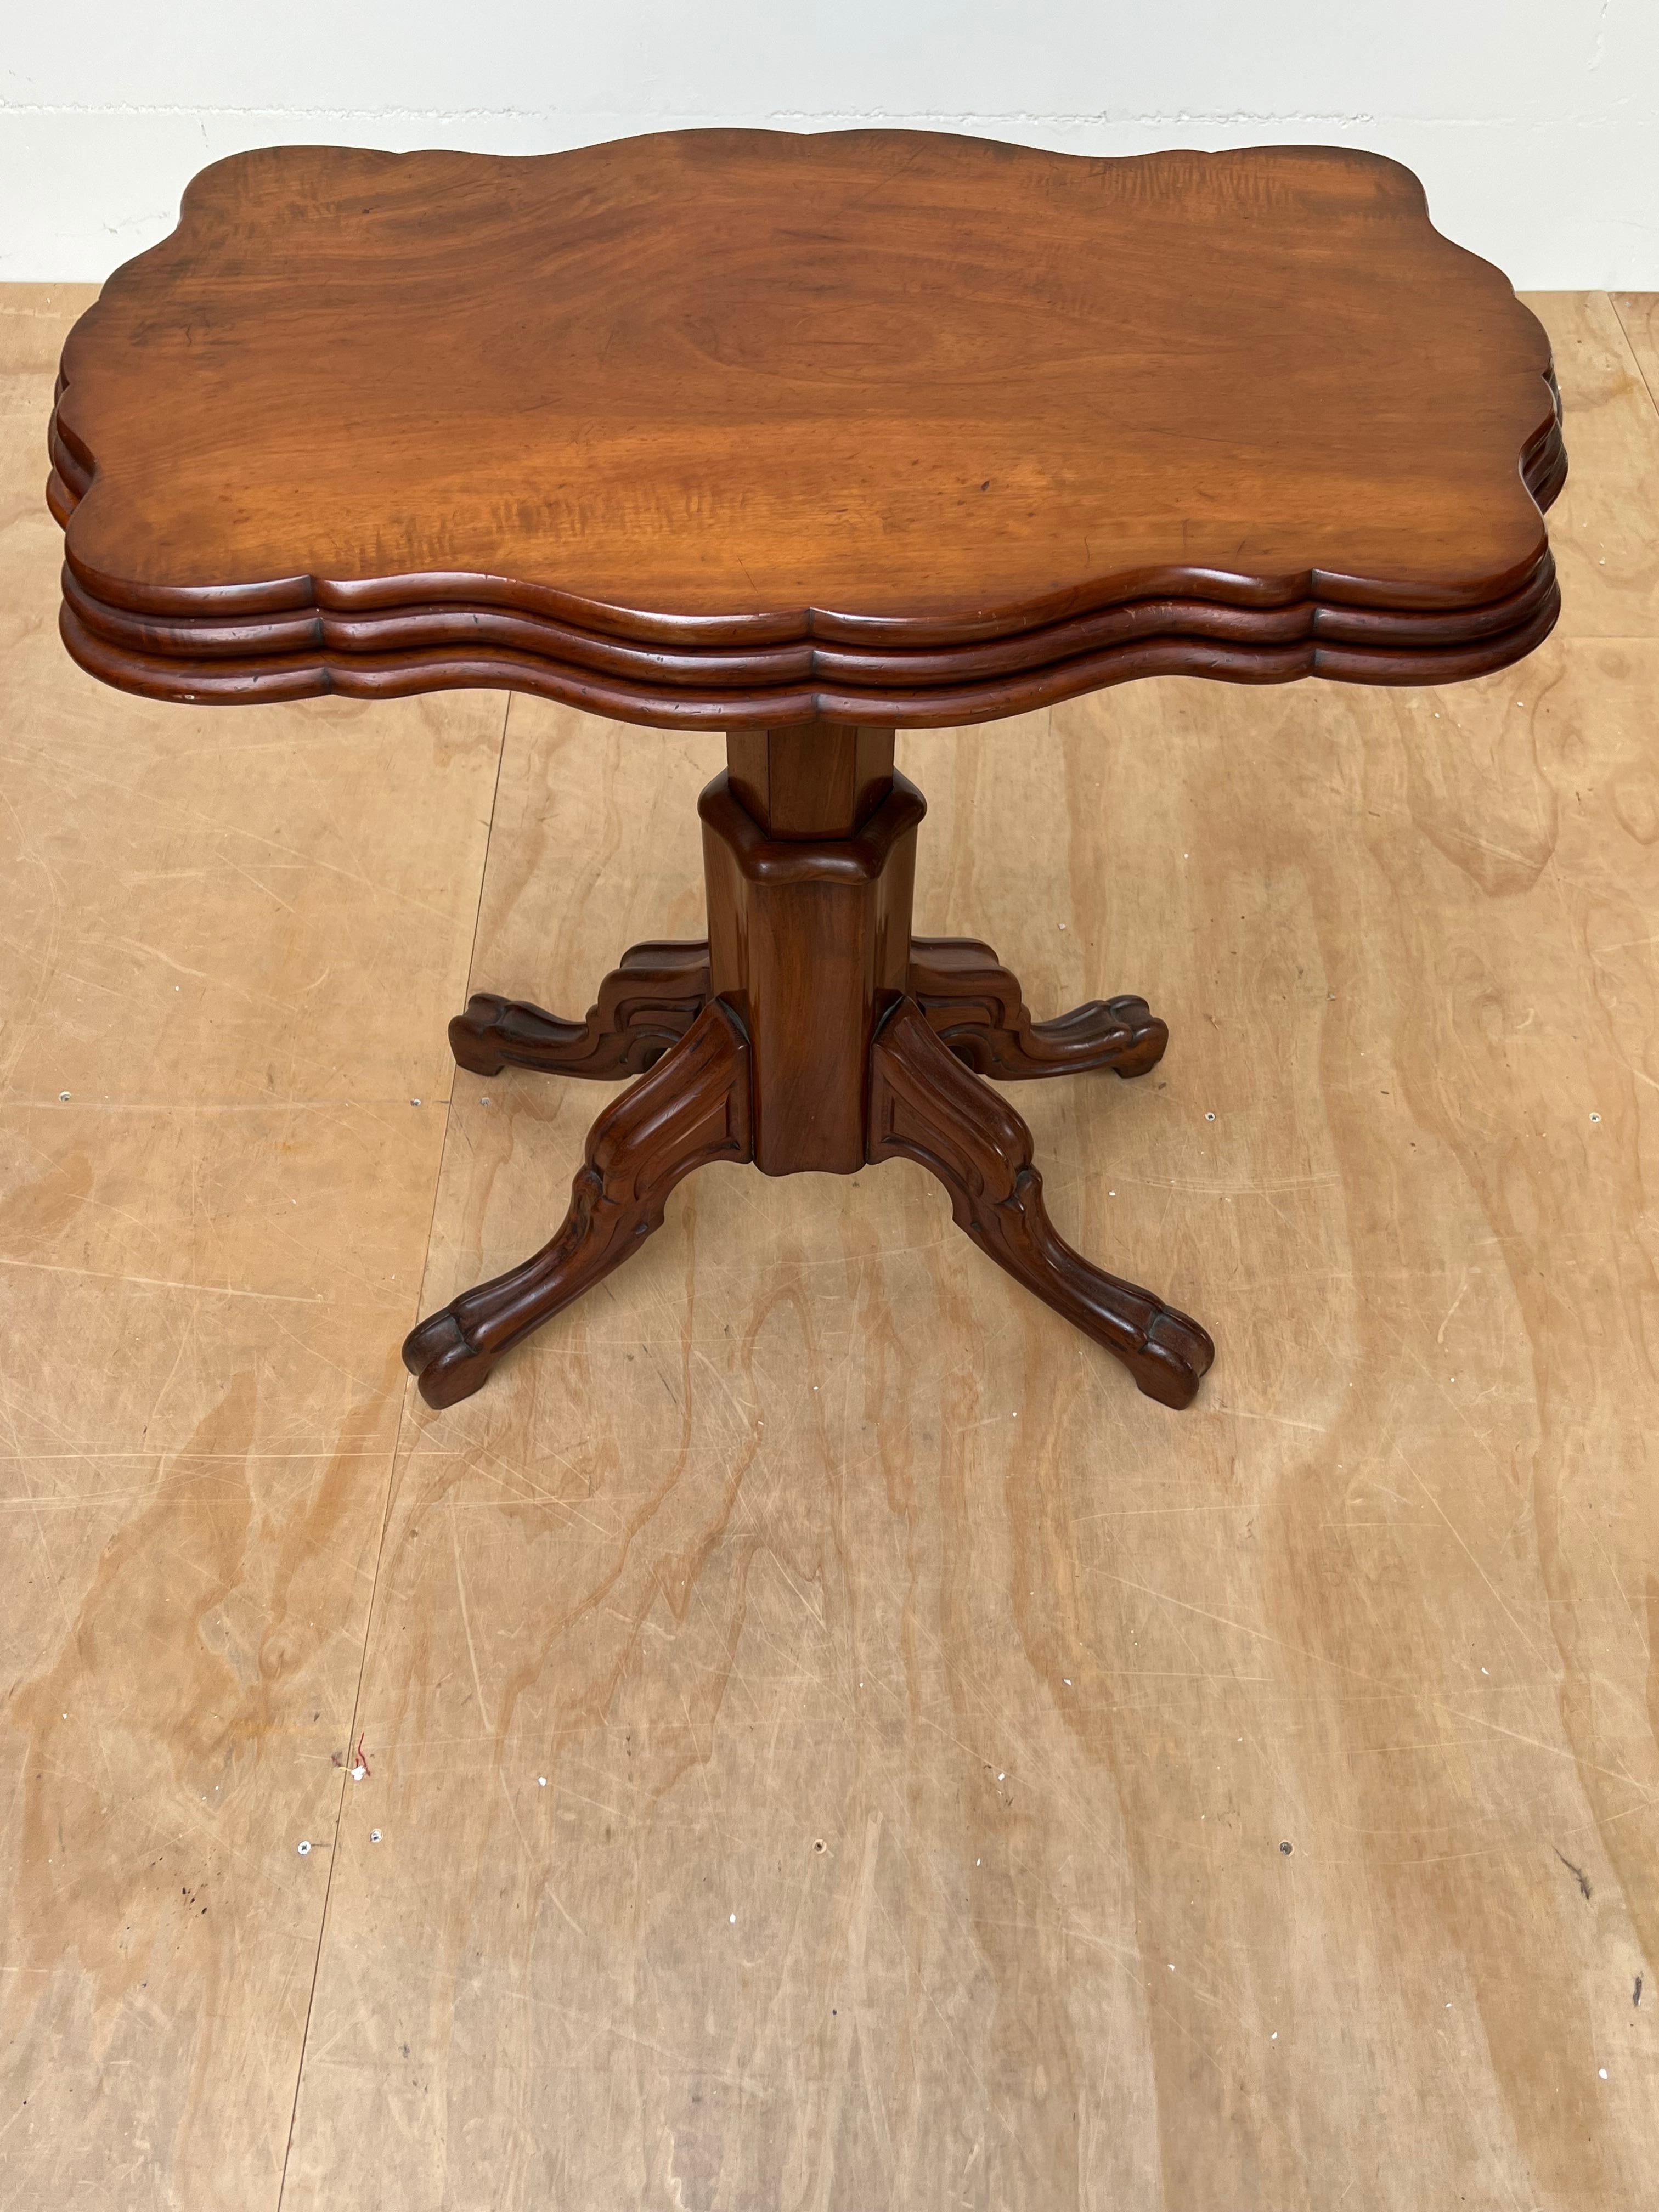 Antique Adjustable Victorian Dumb Waiter Table / Side Table, England, circa 1870 For Sale 5